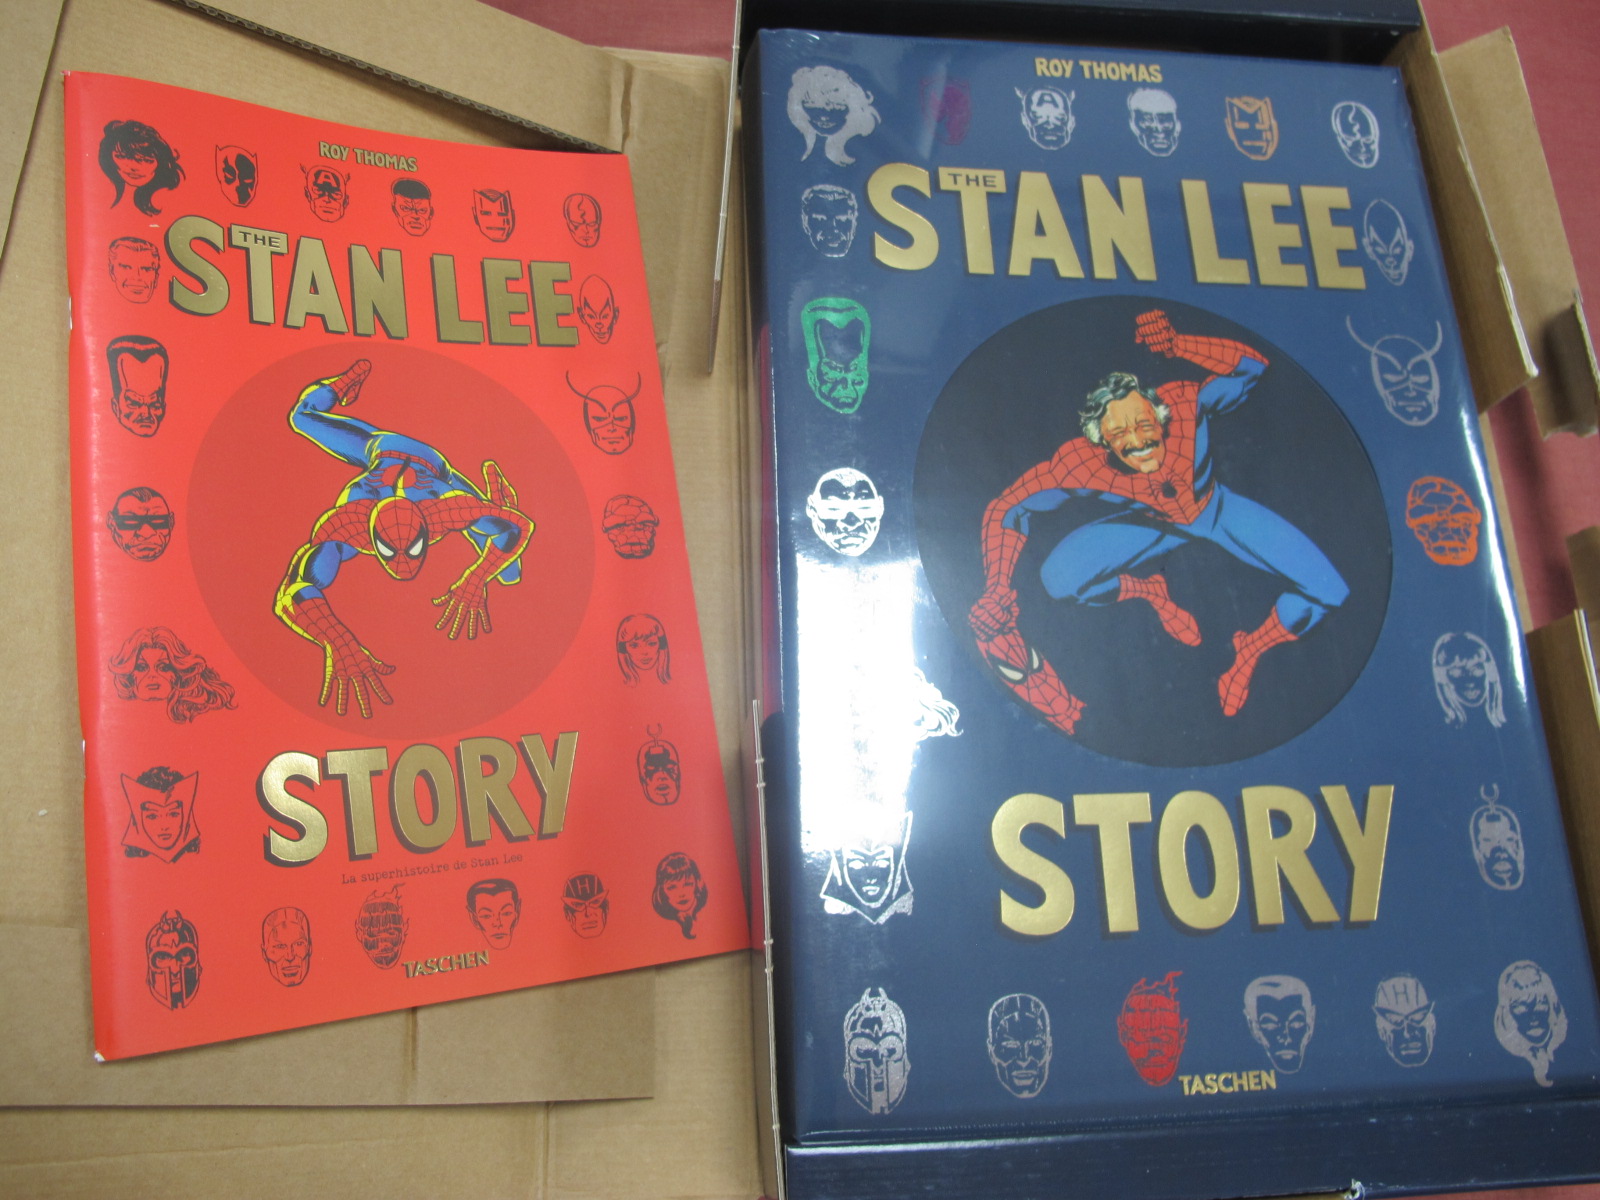 Stan Lee Story by Roy Thomas, (French Language Edition) sealed.